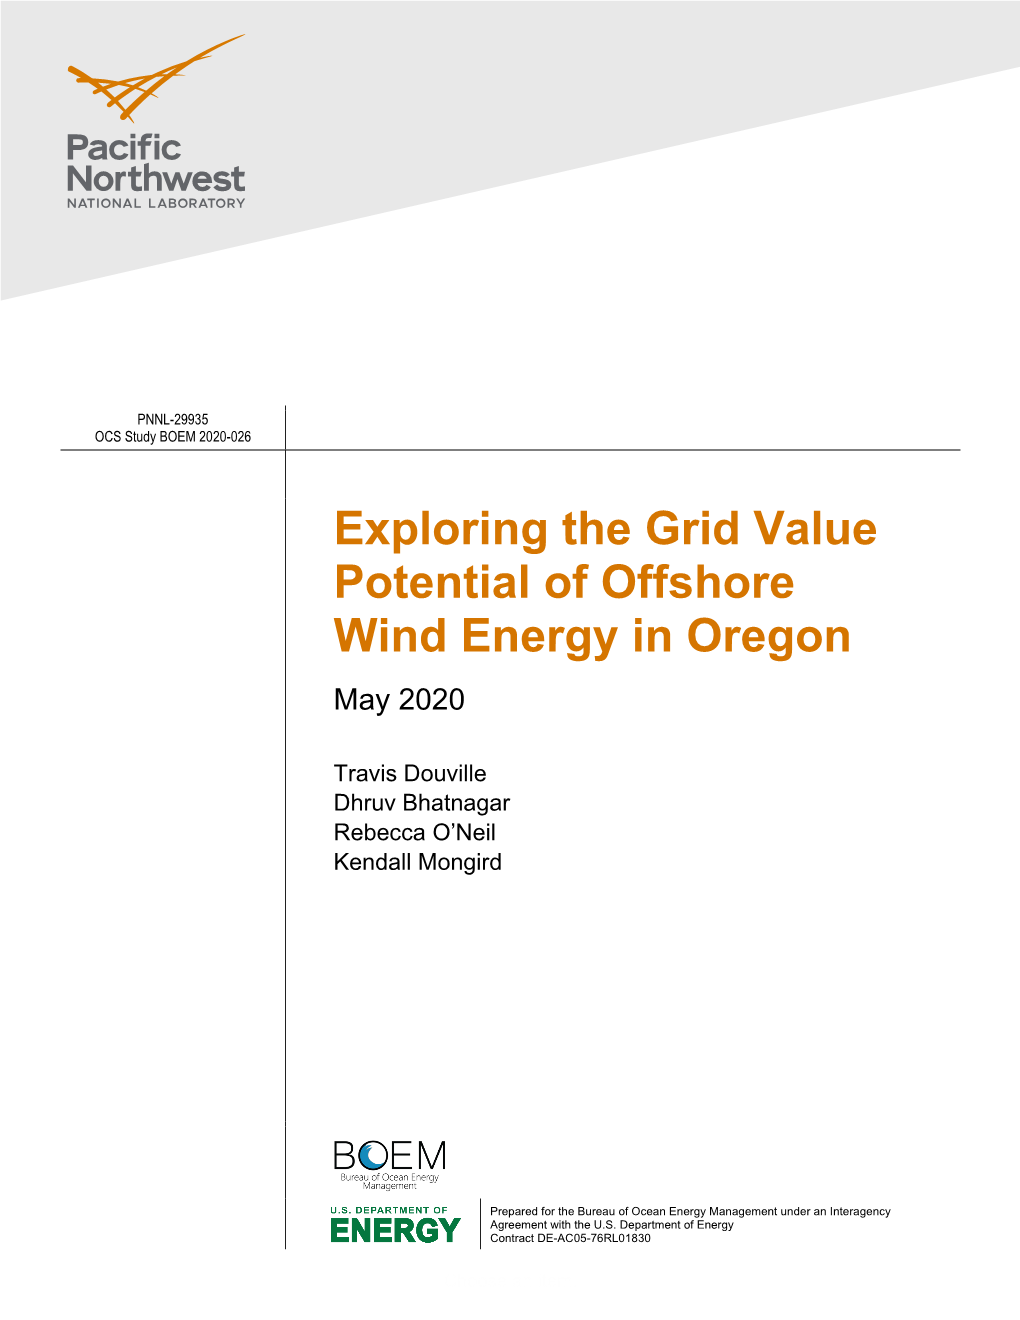 Exploring the Grid Value Potential of Offshore Wind Energy in Oregon May 2020